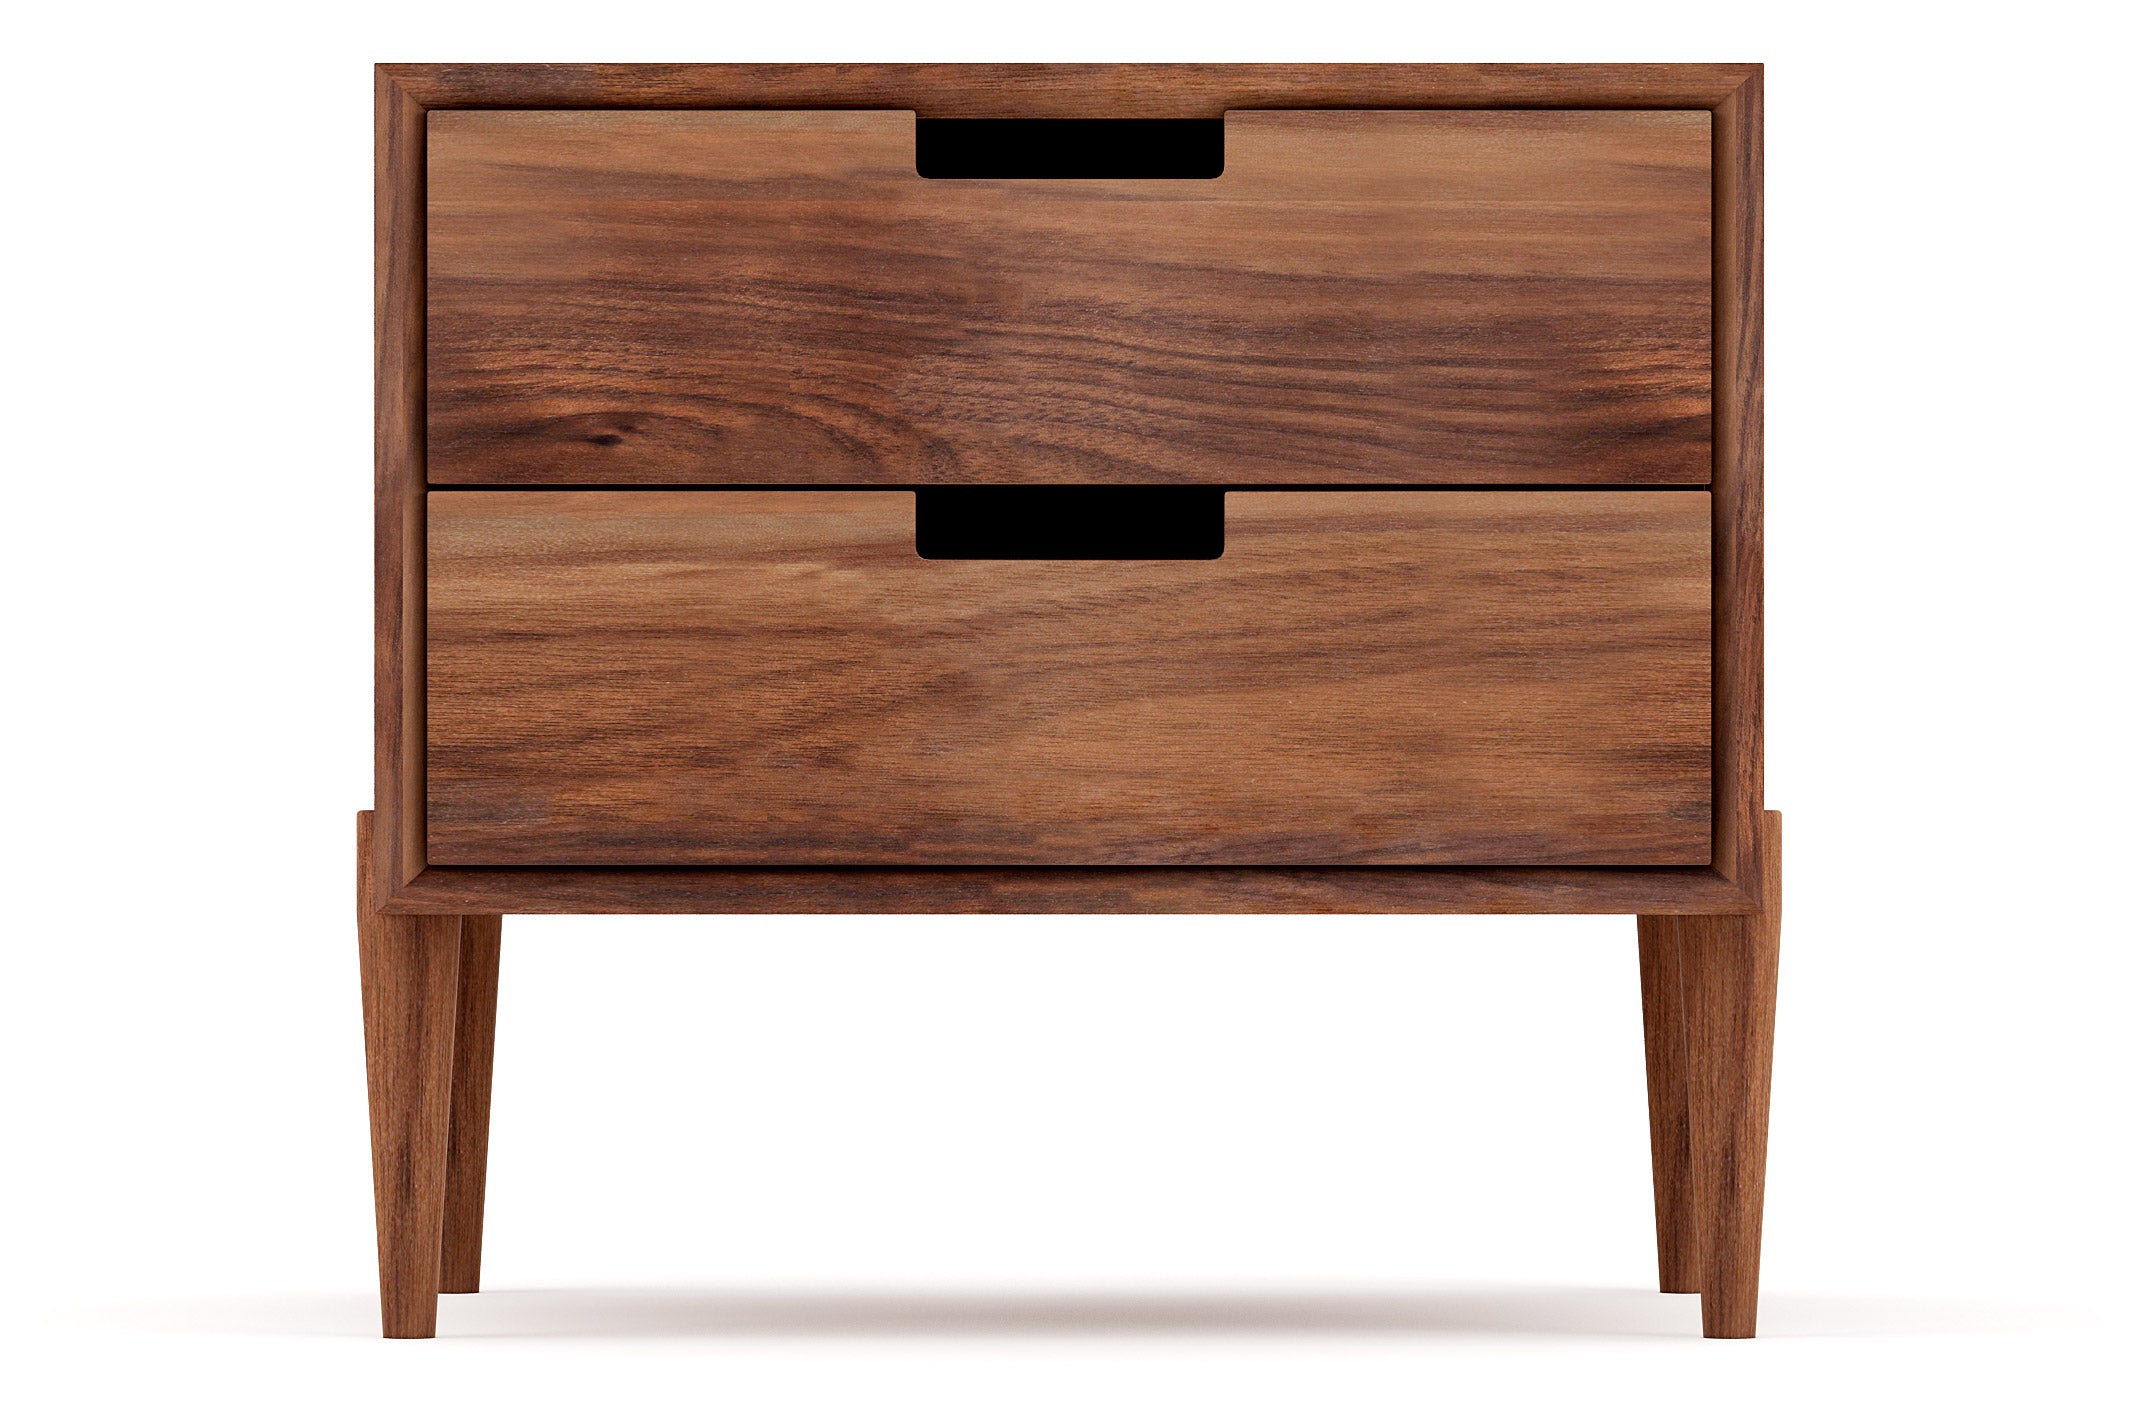 Shown in walnut with cutouts